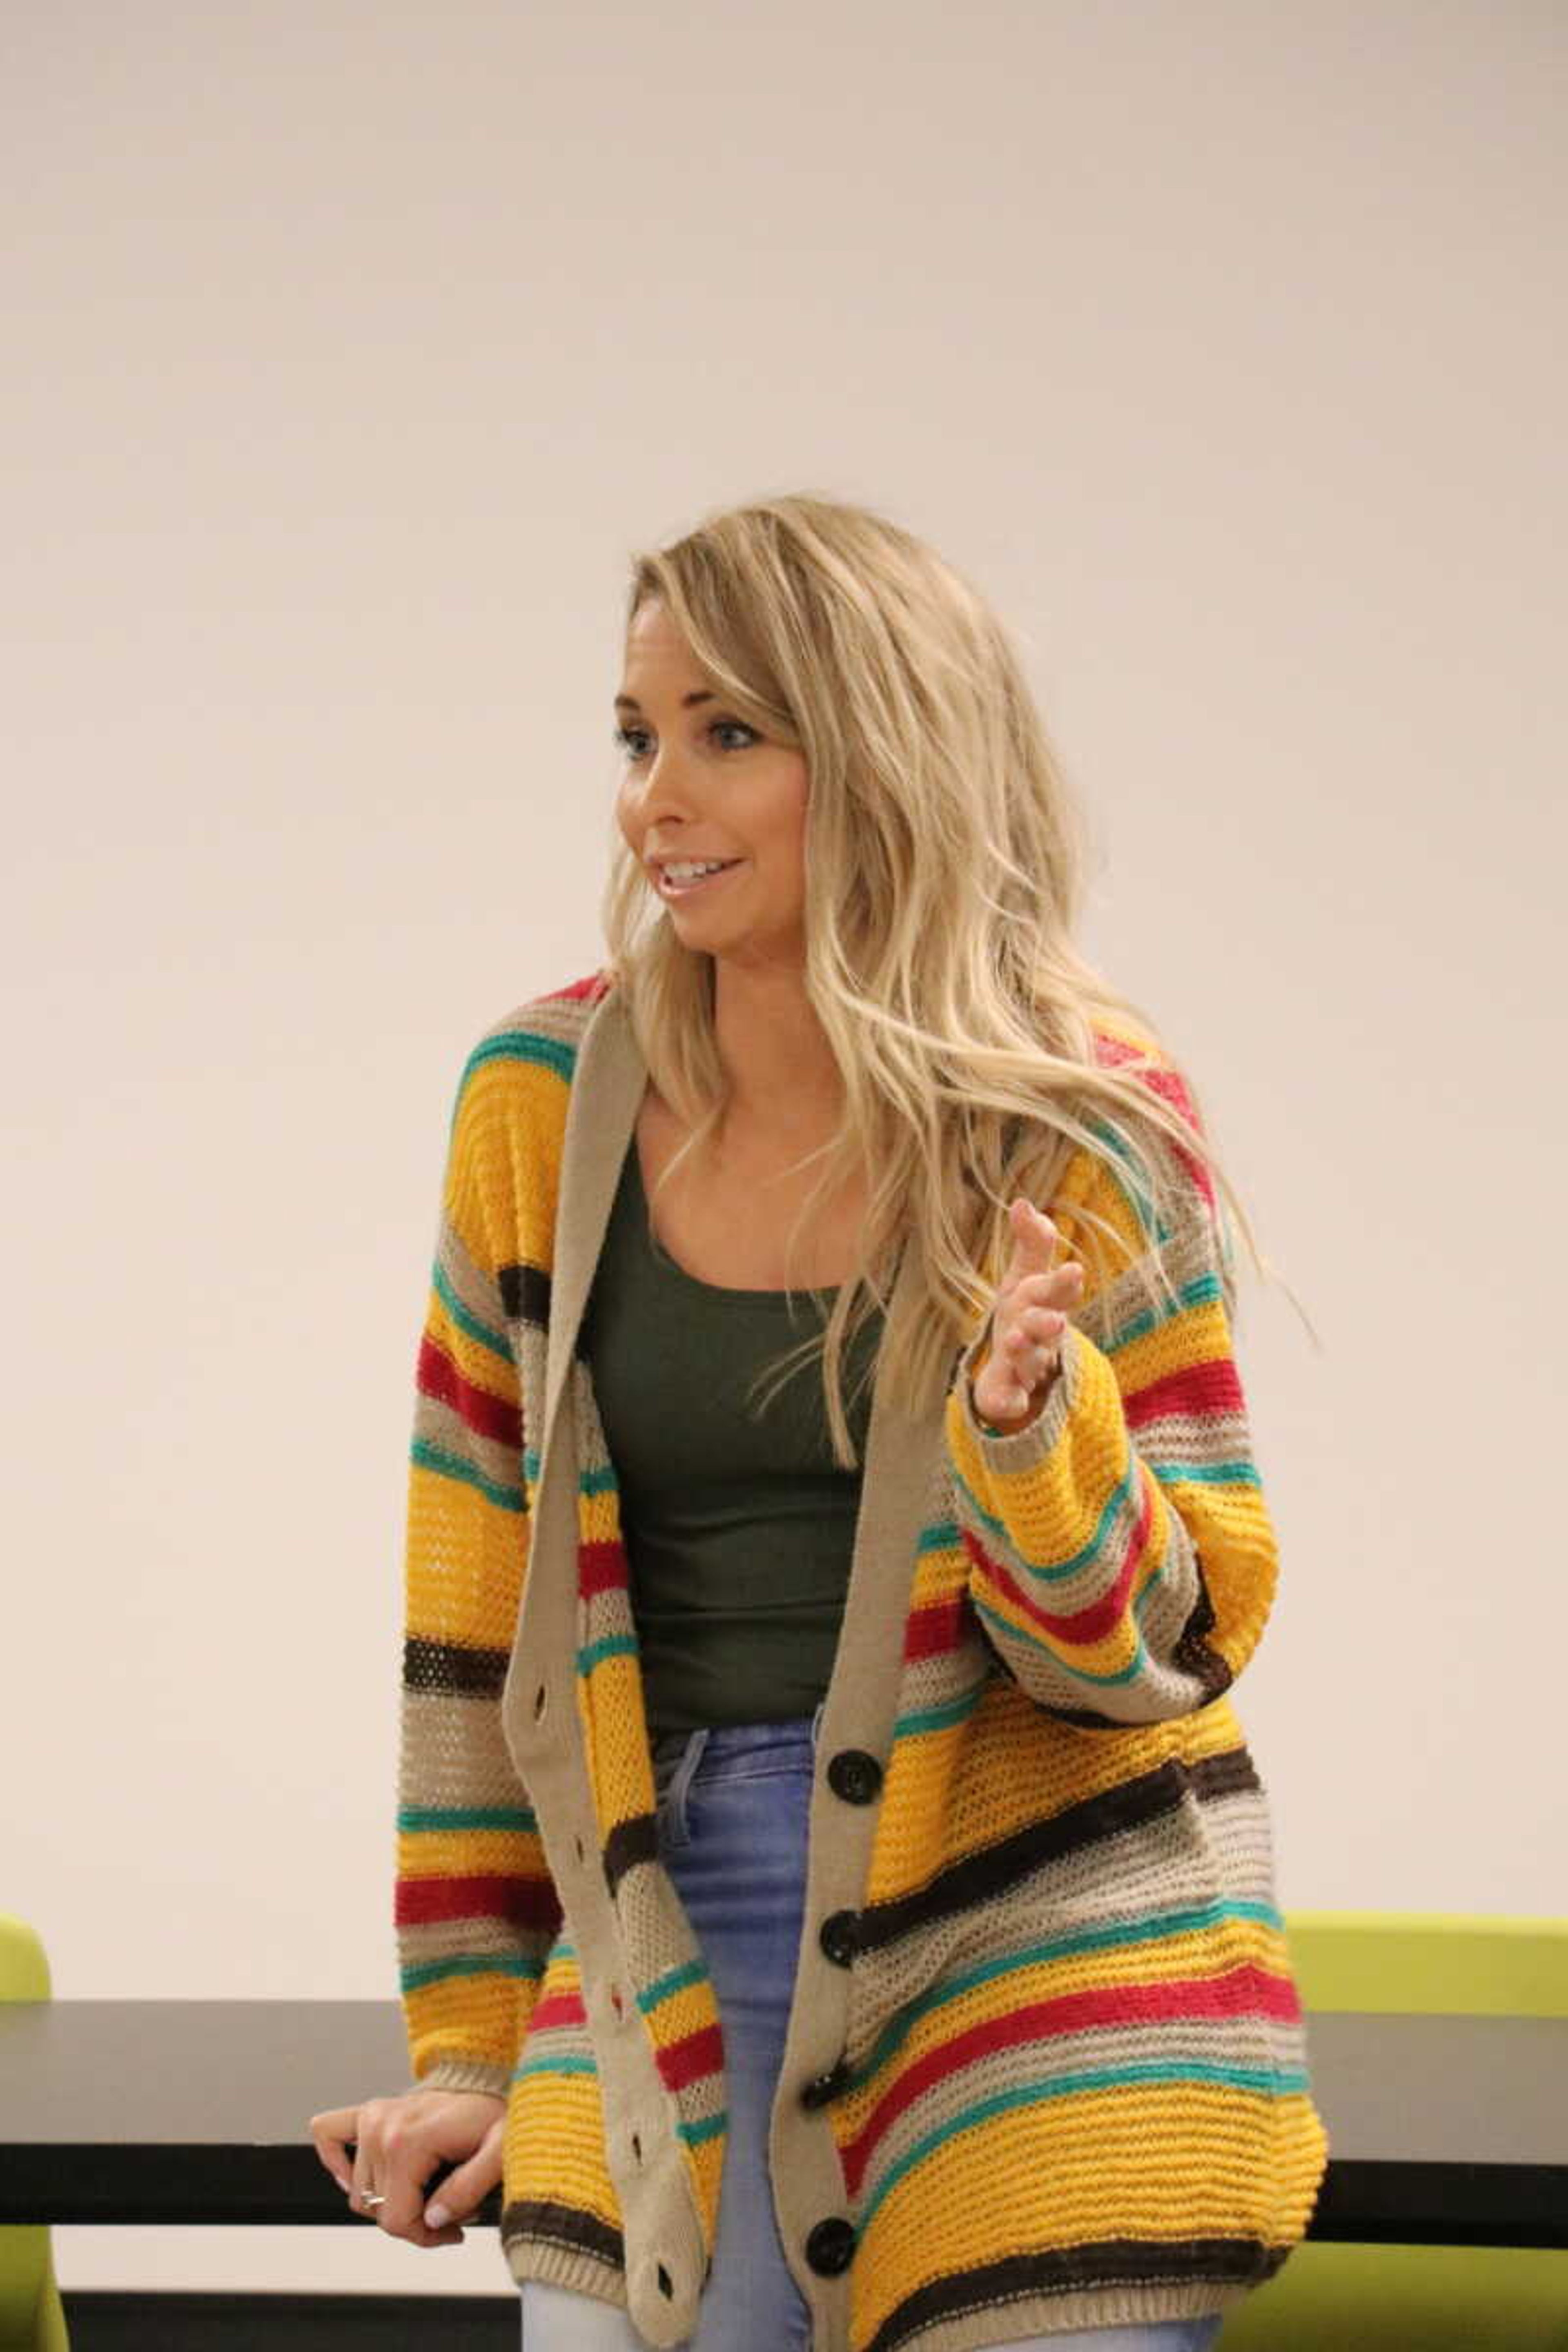 Southeast alum and owner of Lemonade House Grille in Cape Girardeau spoke to students as part of the Entrepreneurship Speaker Series held at the Catapult Creative House March 27.